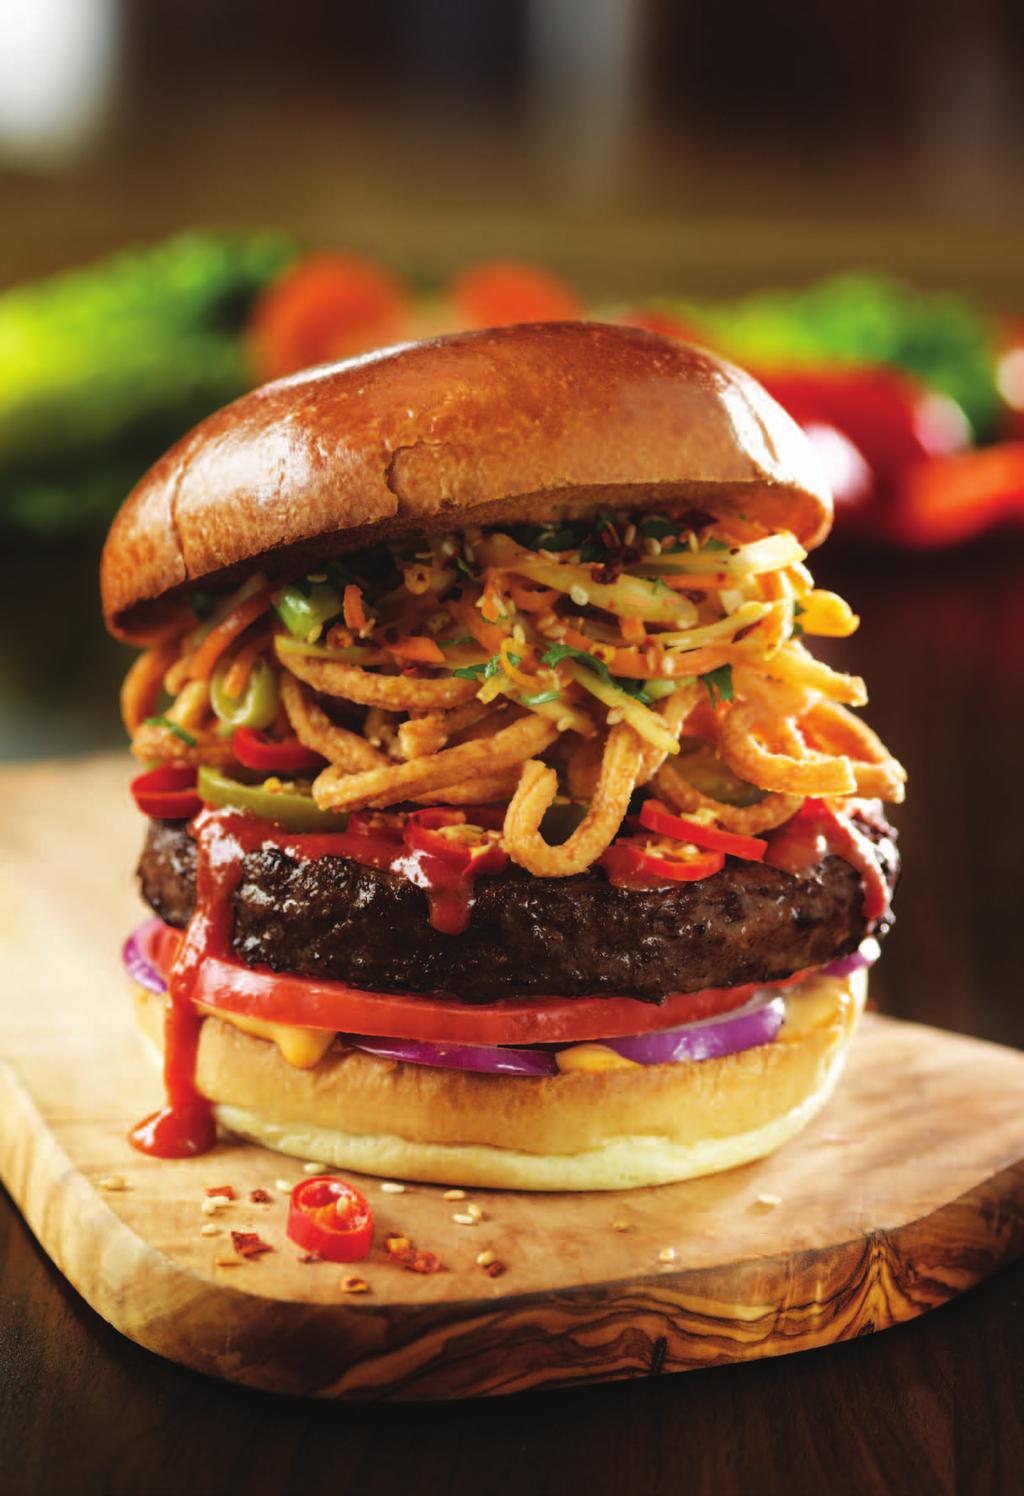 PRIME CUTS OF OF British Isles Beef new Our 7oz* flame-grilled burgers are made with prime cuts of beef from the British Isles. We use chuck steak for flavor and beef brisket for tenderness.